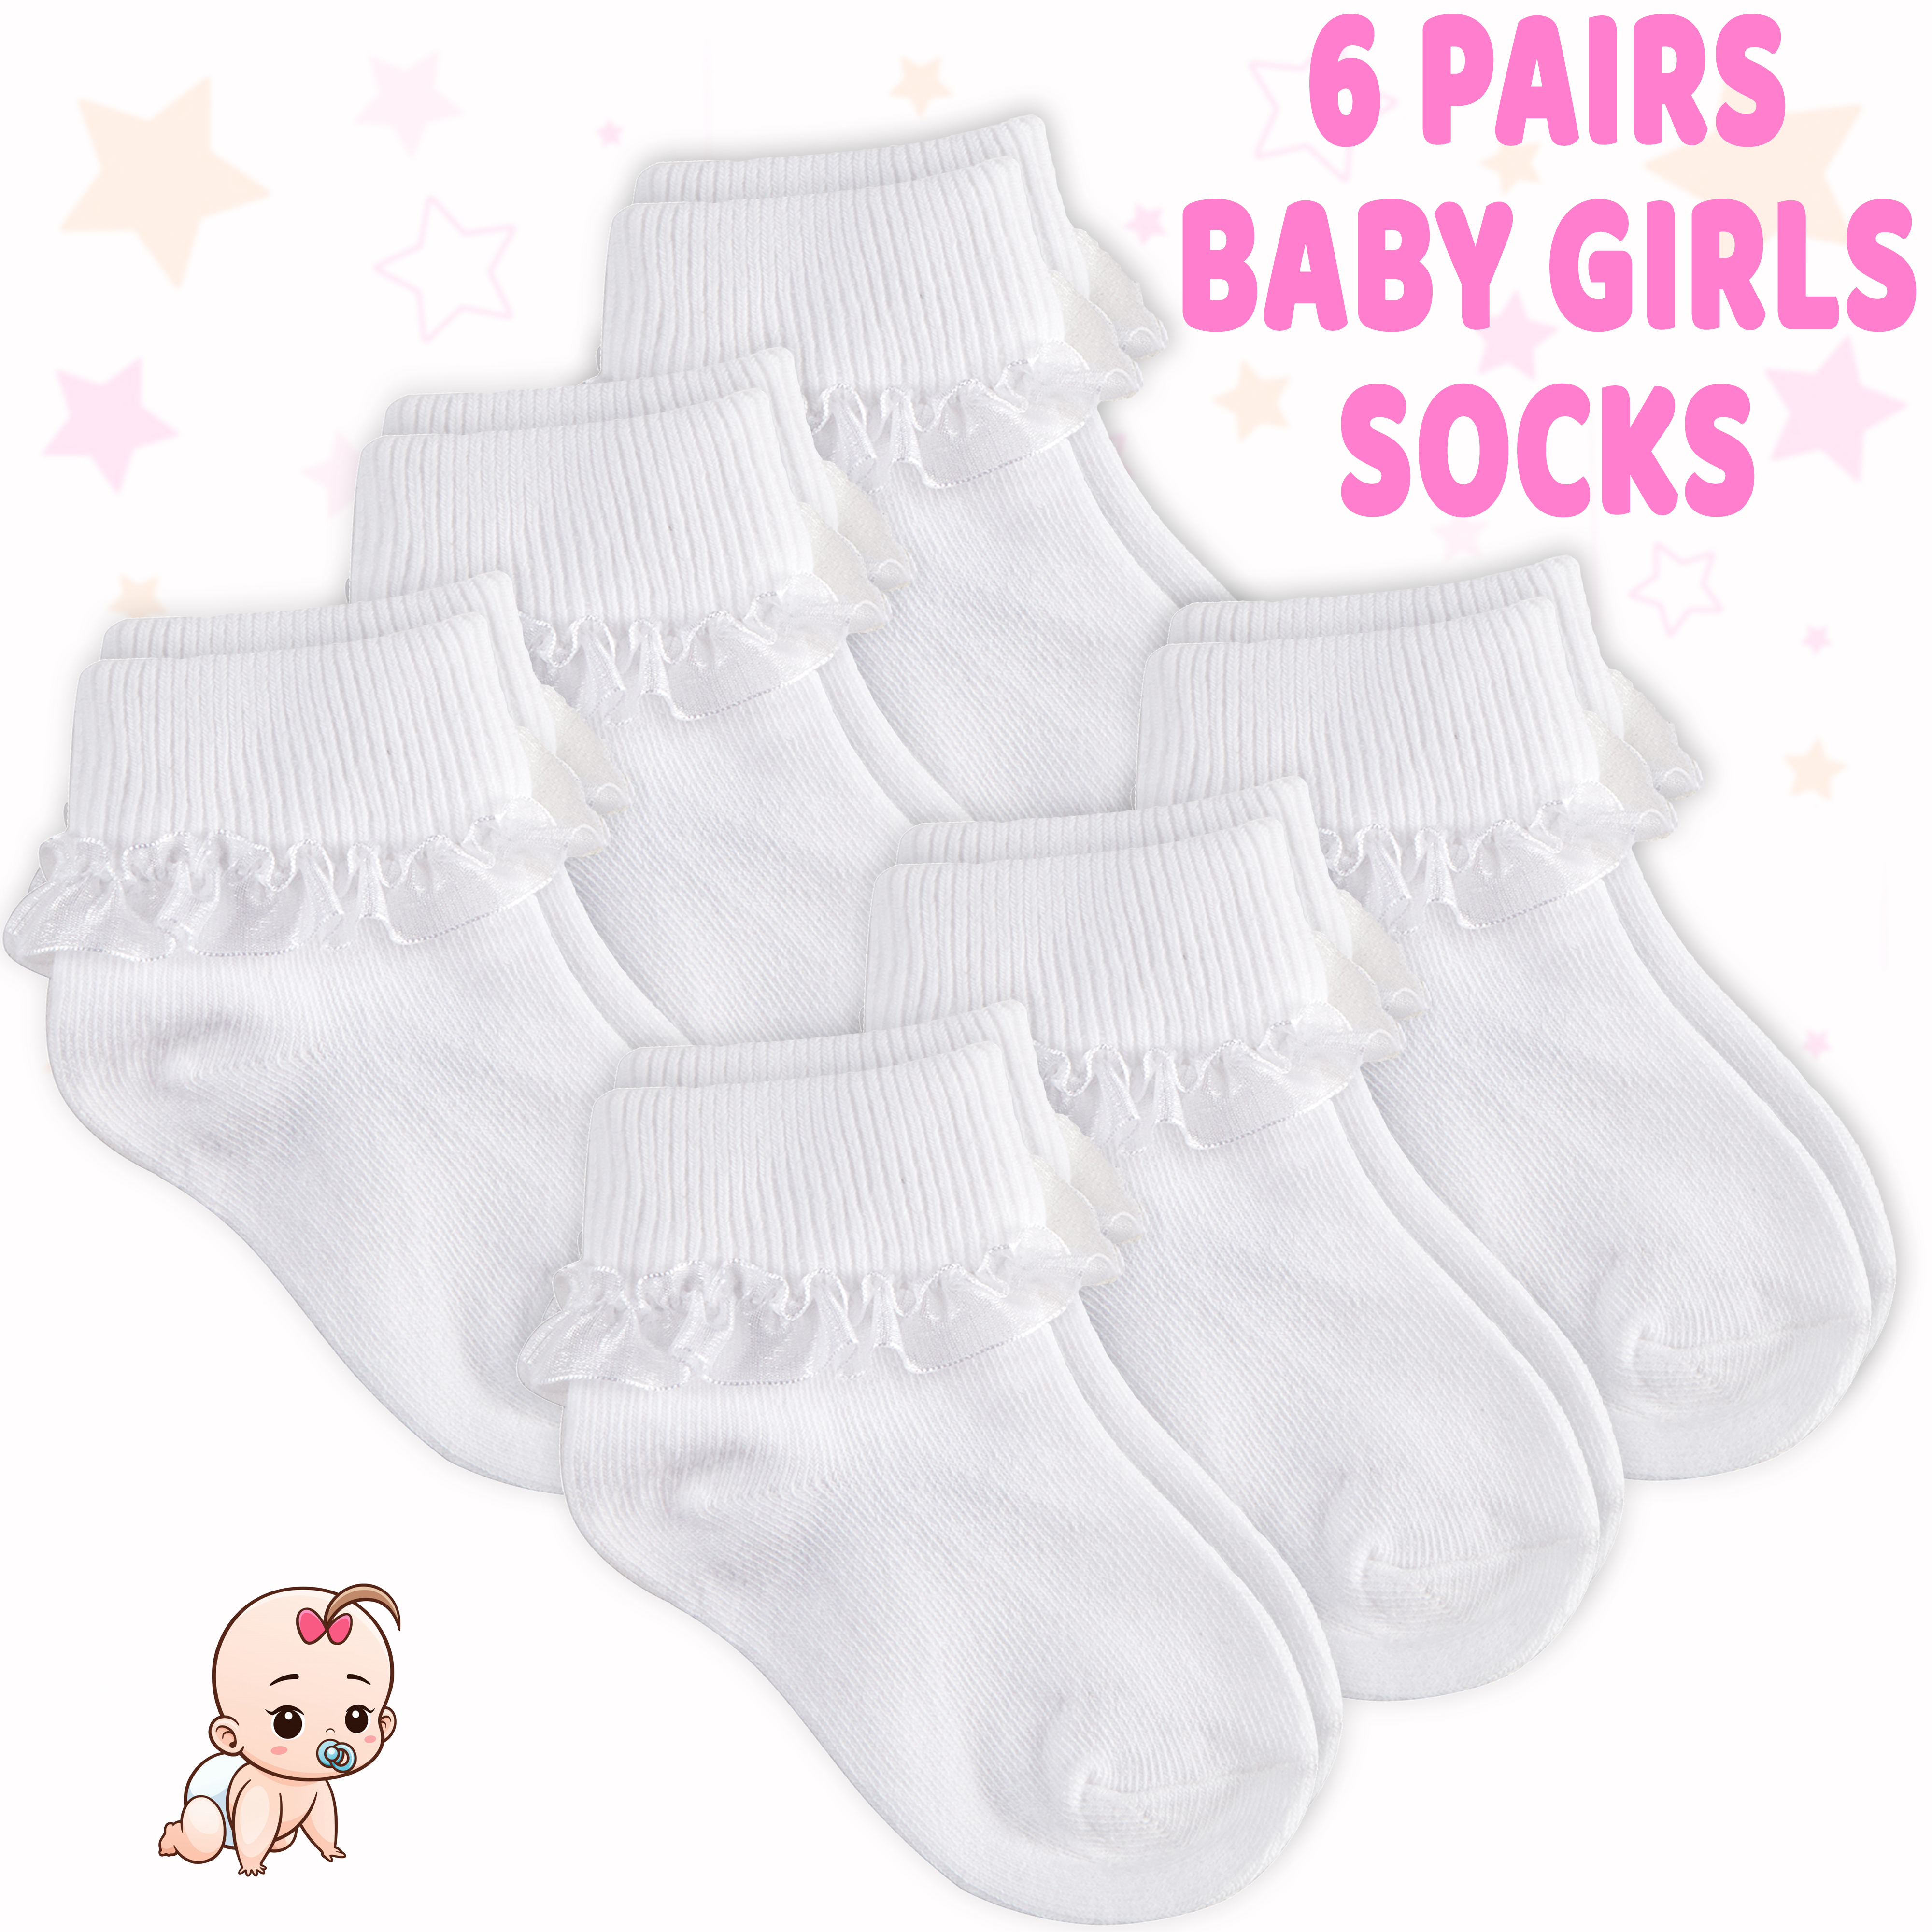 5 pairs of Baby Girls Socks Roll Top Socks Age 6-12 months 